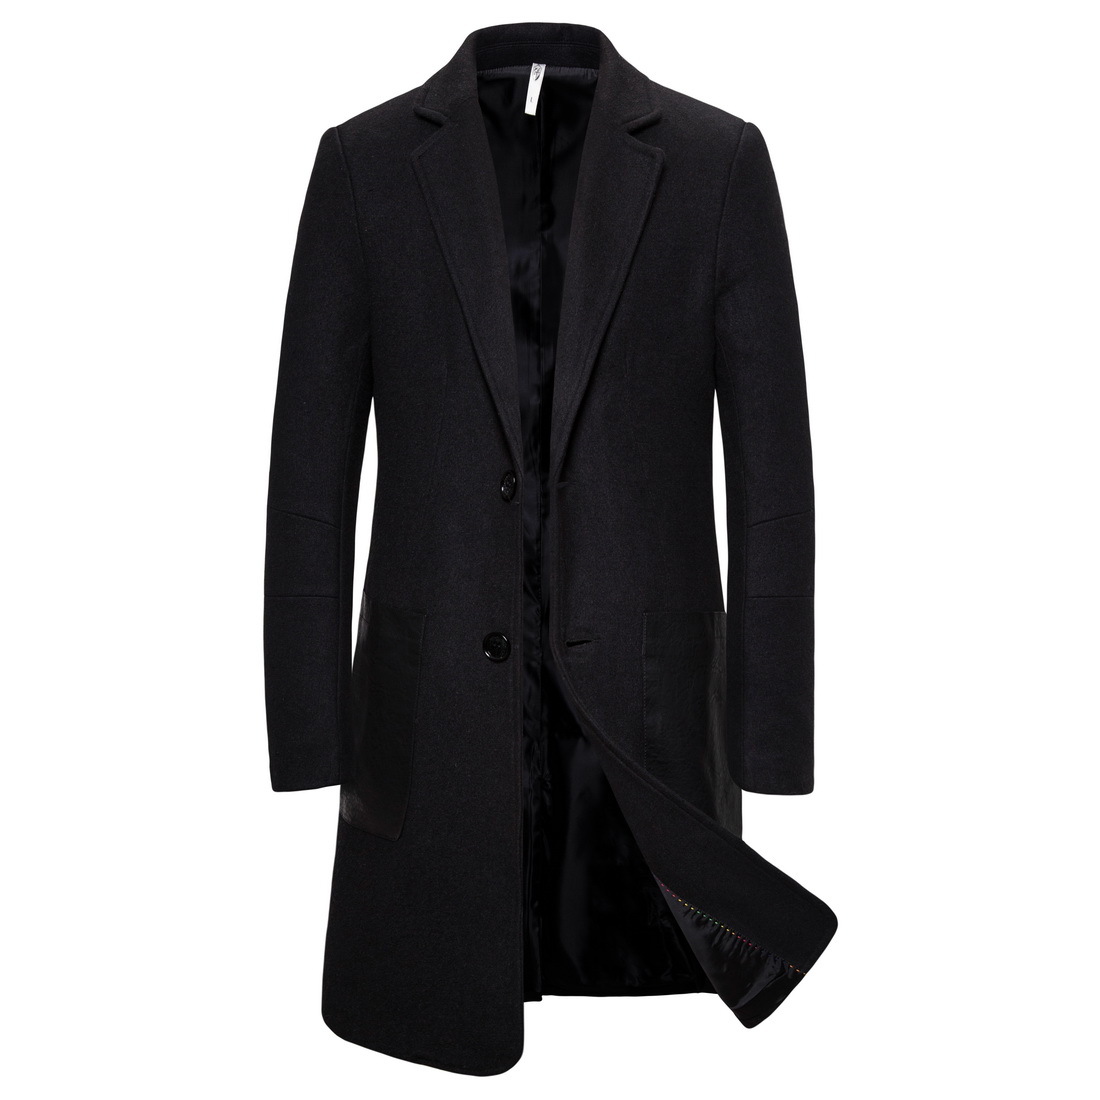 New Arrivals Men Winter Wool Blends Trench Coat Style Slim Fit Long ...